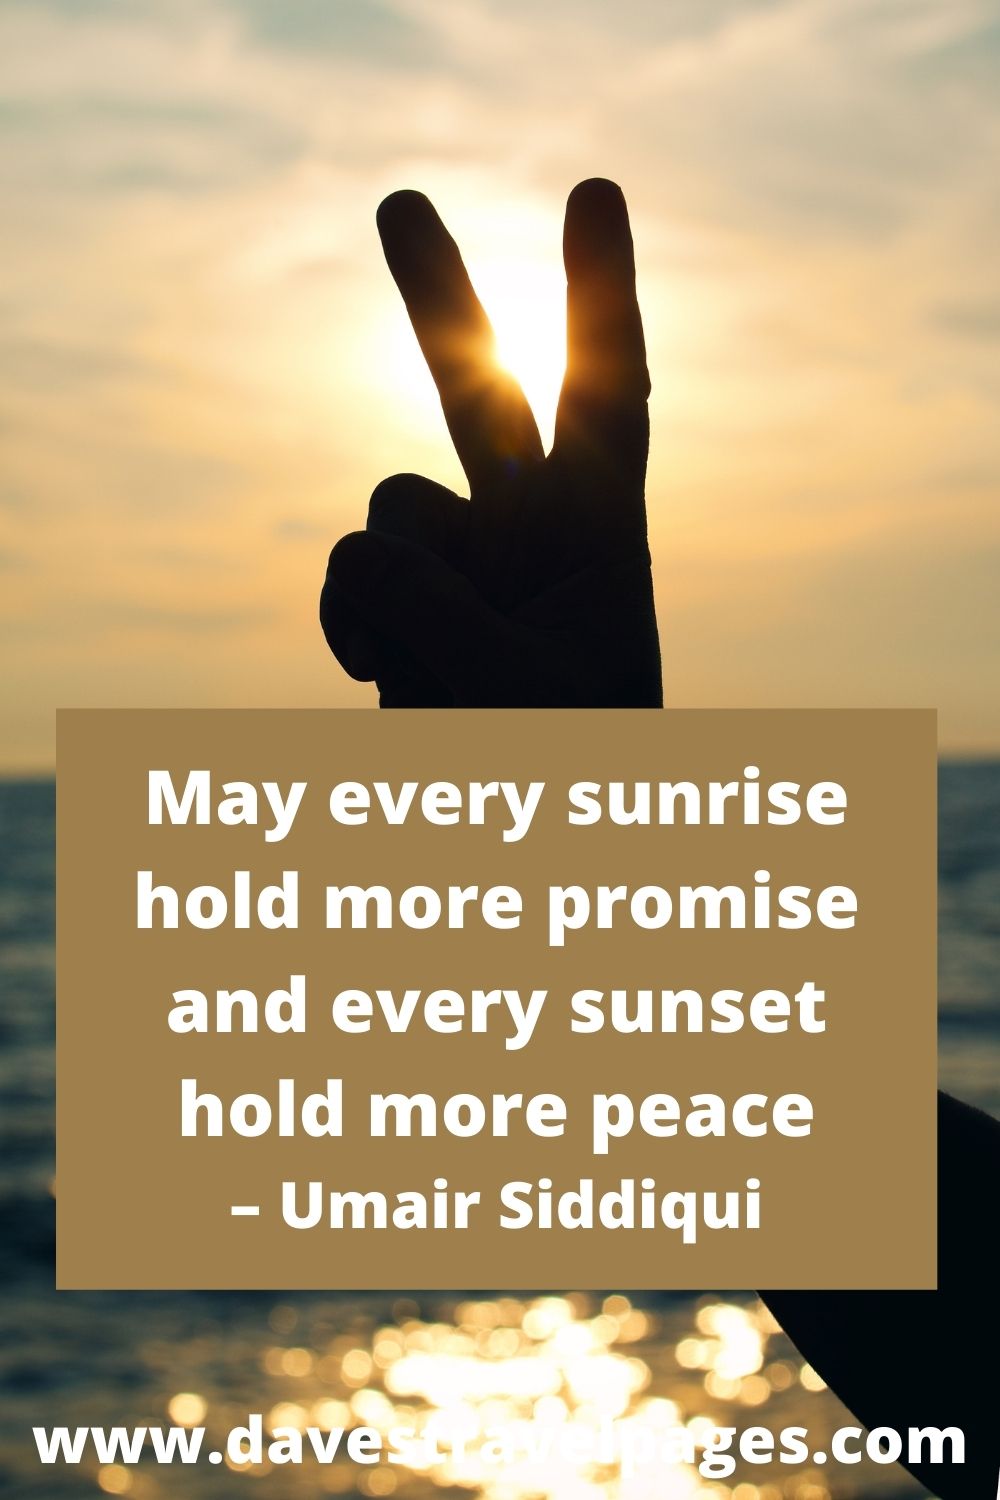 May every sunrise hold more promise and every sunset hold more peace – Umair Siddiqui